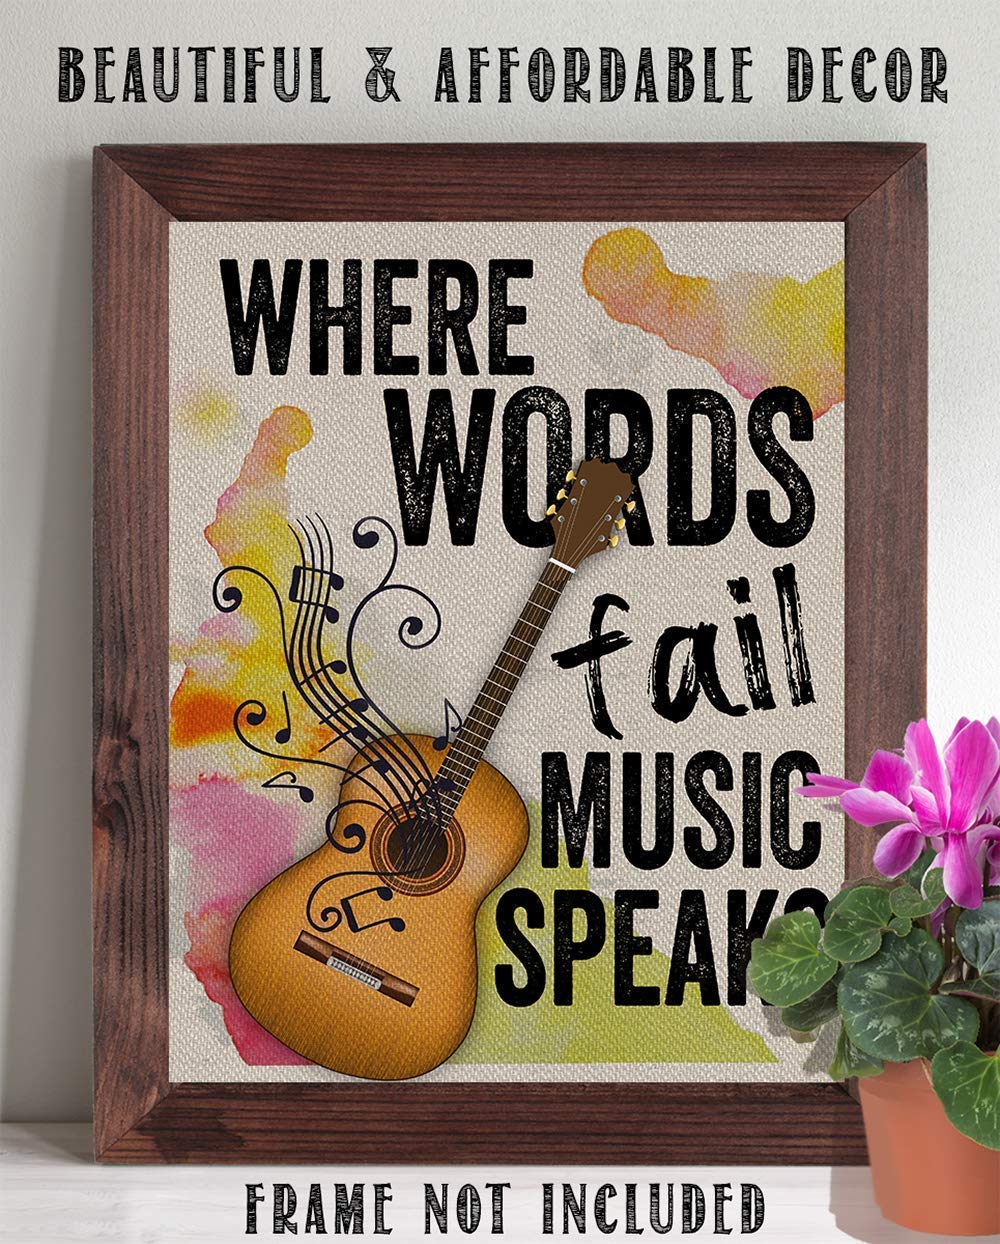 Where Words Fail Music Speaks Poster, Music Posters Room, Modern Home Decor, Guitar Canvas Wall Art, Perfect Gift for Musicians, Inspirational Quotes Wall Art,11x14 Inch Unframe Posters